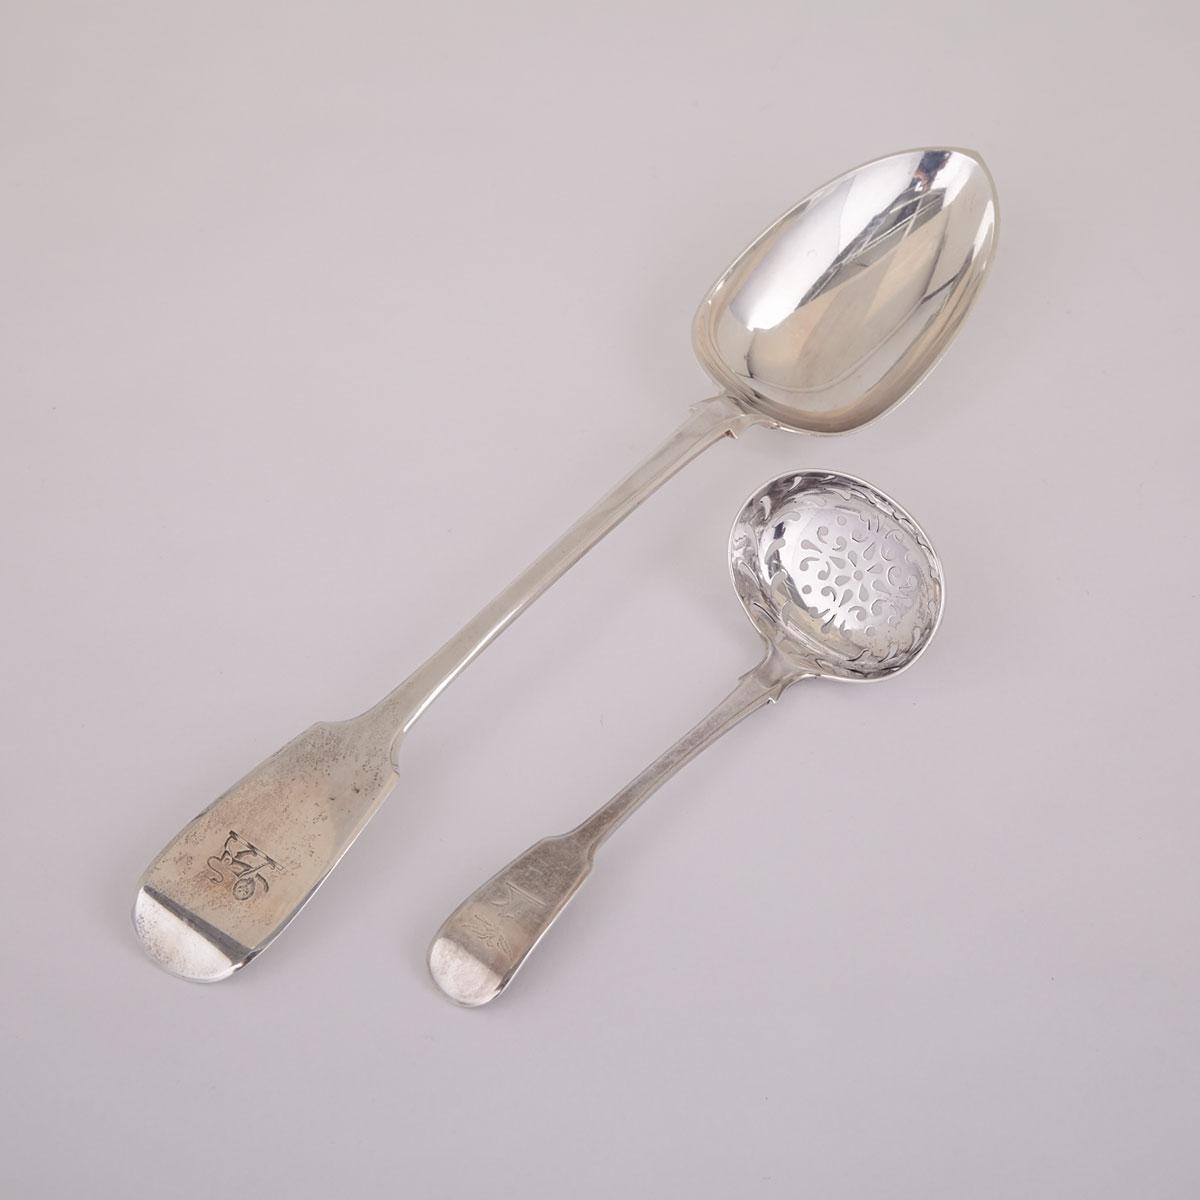 William IV Silver Fiddle Pattern Sifting Ladle, William Bateman II, London, 1830 and a Victorian Serving Spoon, John Stone, Exeter, 1844